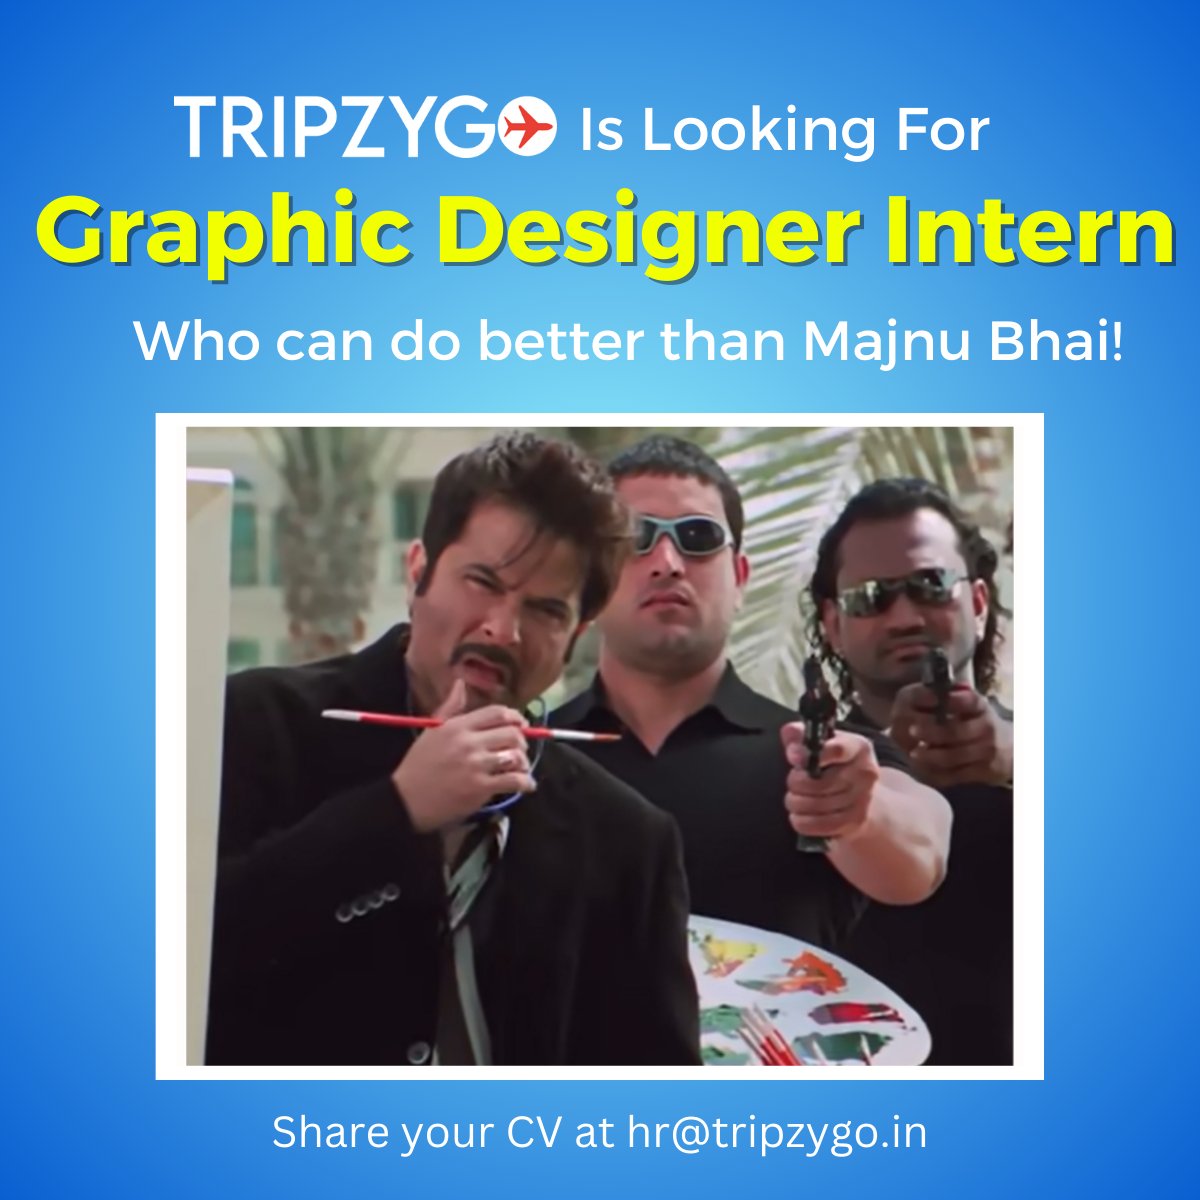 Meme Creative ** banaoge humare liye ?
Write us at ➡ hr@tripzygo.in
*Don't leave your CV/portfolio behind 😄

Location: Gurgaon.

Can't wait to have you all to be part of the #tripzygo family ❤

.
#job #jobseekers #jobvacancy #jobsearch #jobopportunity #joboffers #joboffering